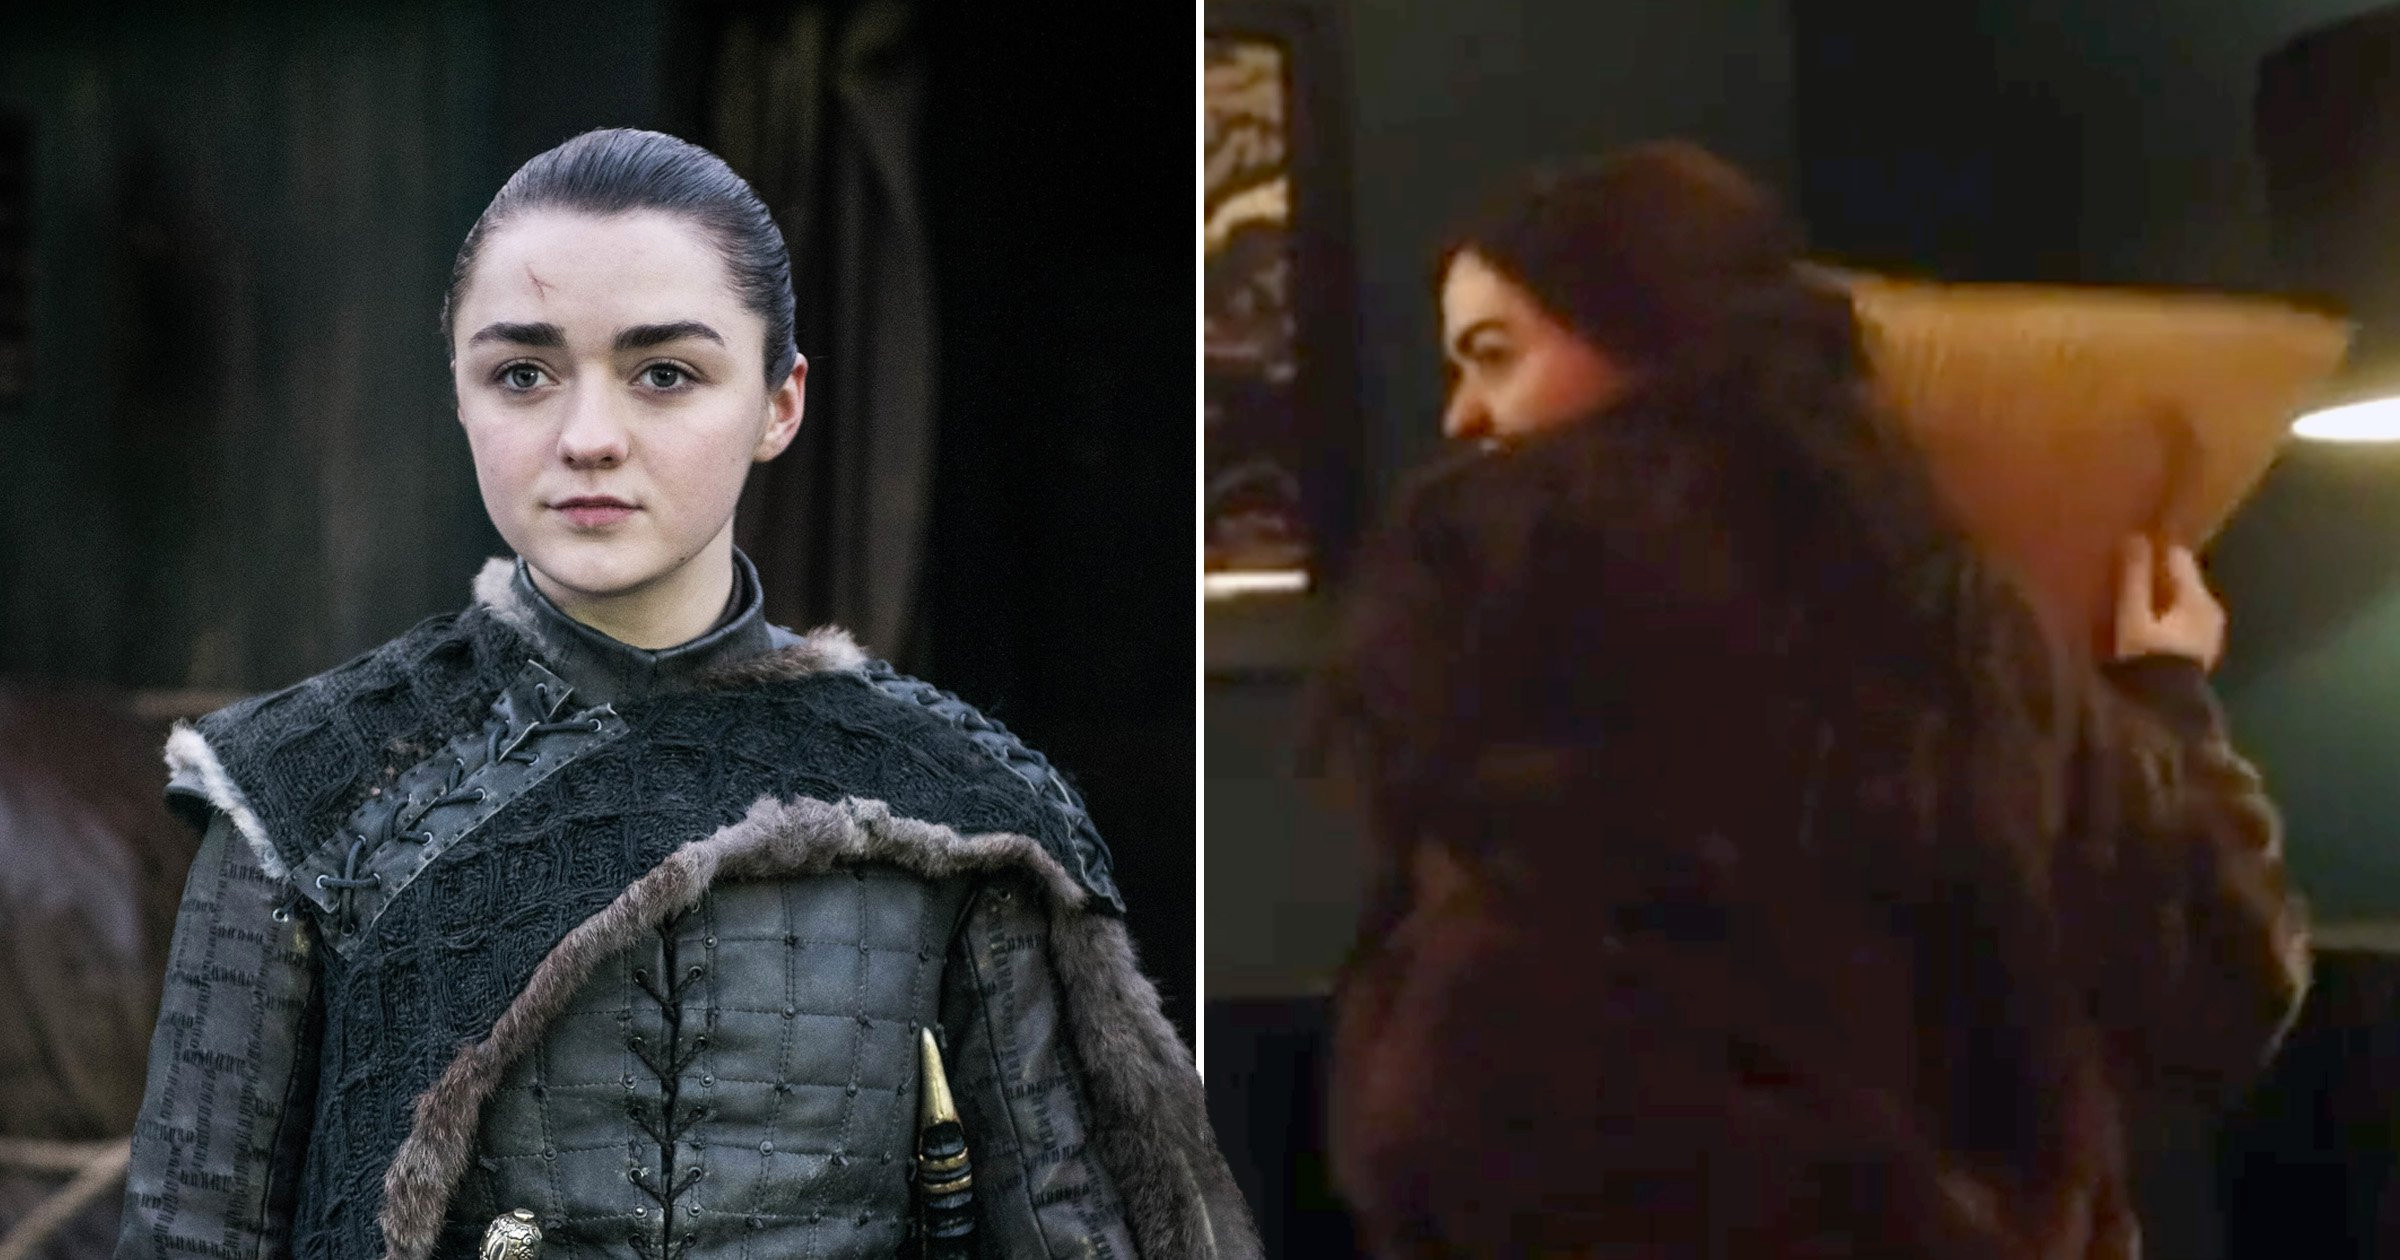 Maisie Williams scene in Two Weeks To Live mirrors pivotal Arya Stark moment in Game Of Thrones